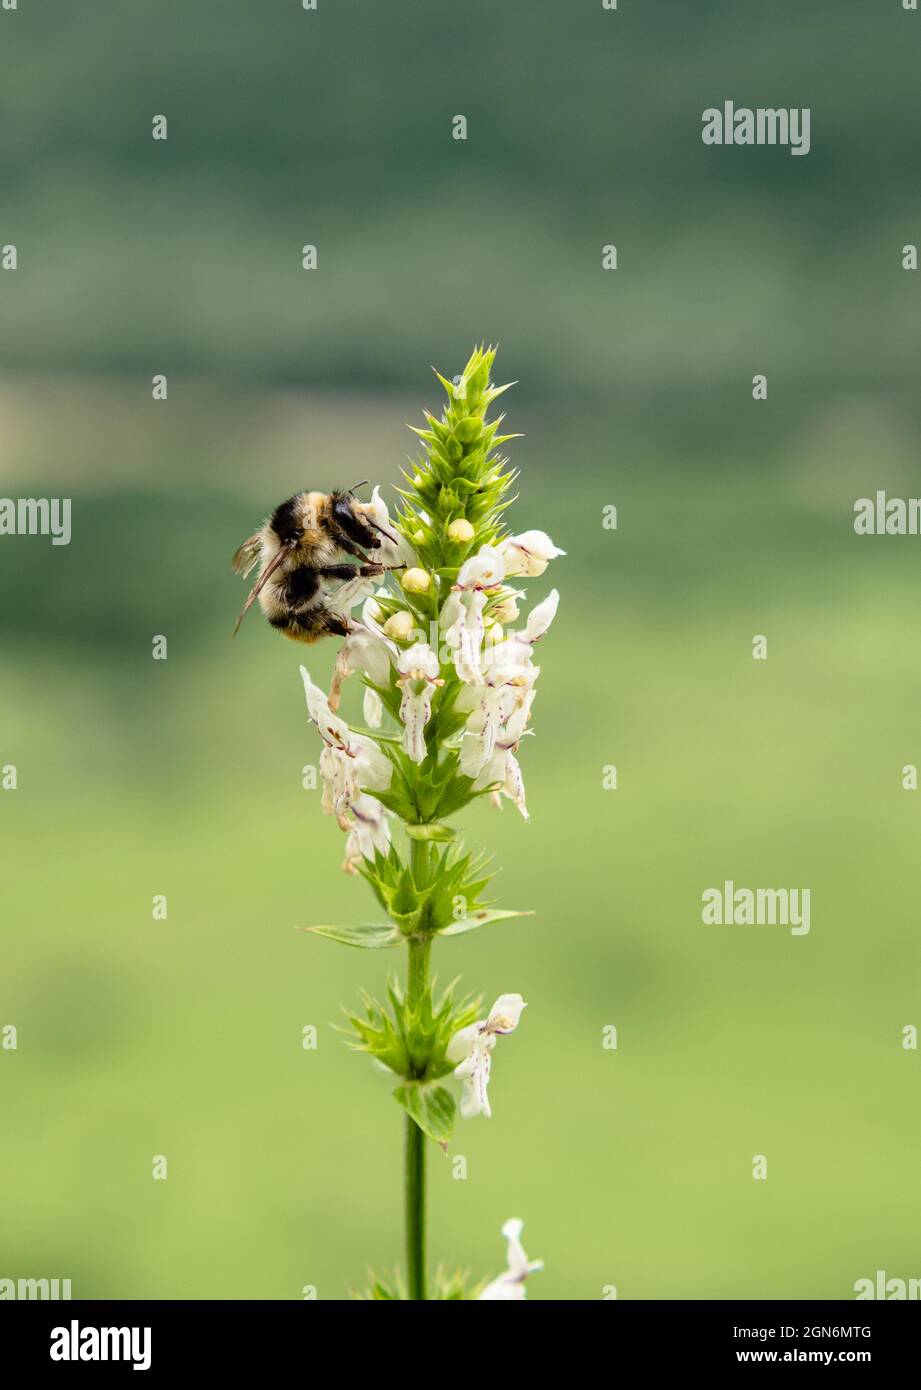 A honeybee collects nectar on a flower of Brachycorythis . Insect close-up. Blurred background Stock Photo